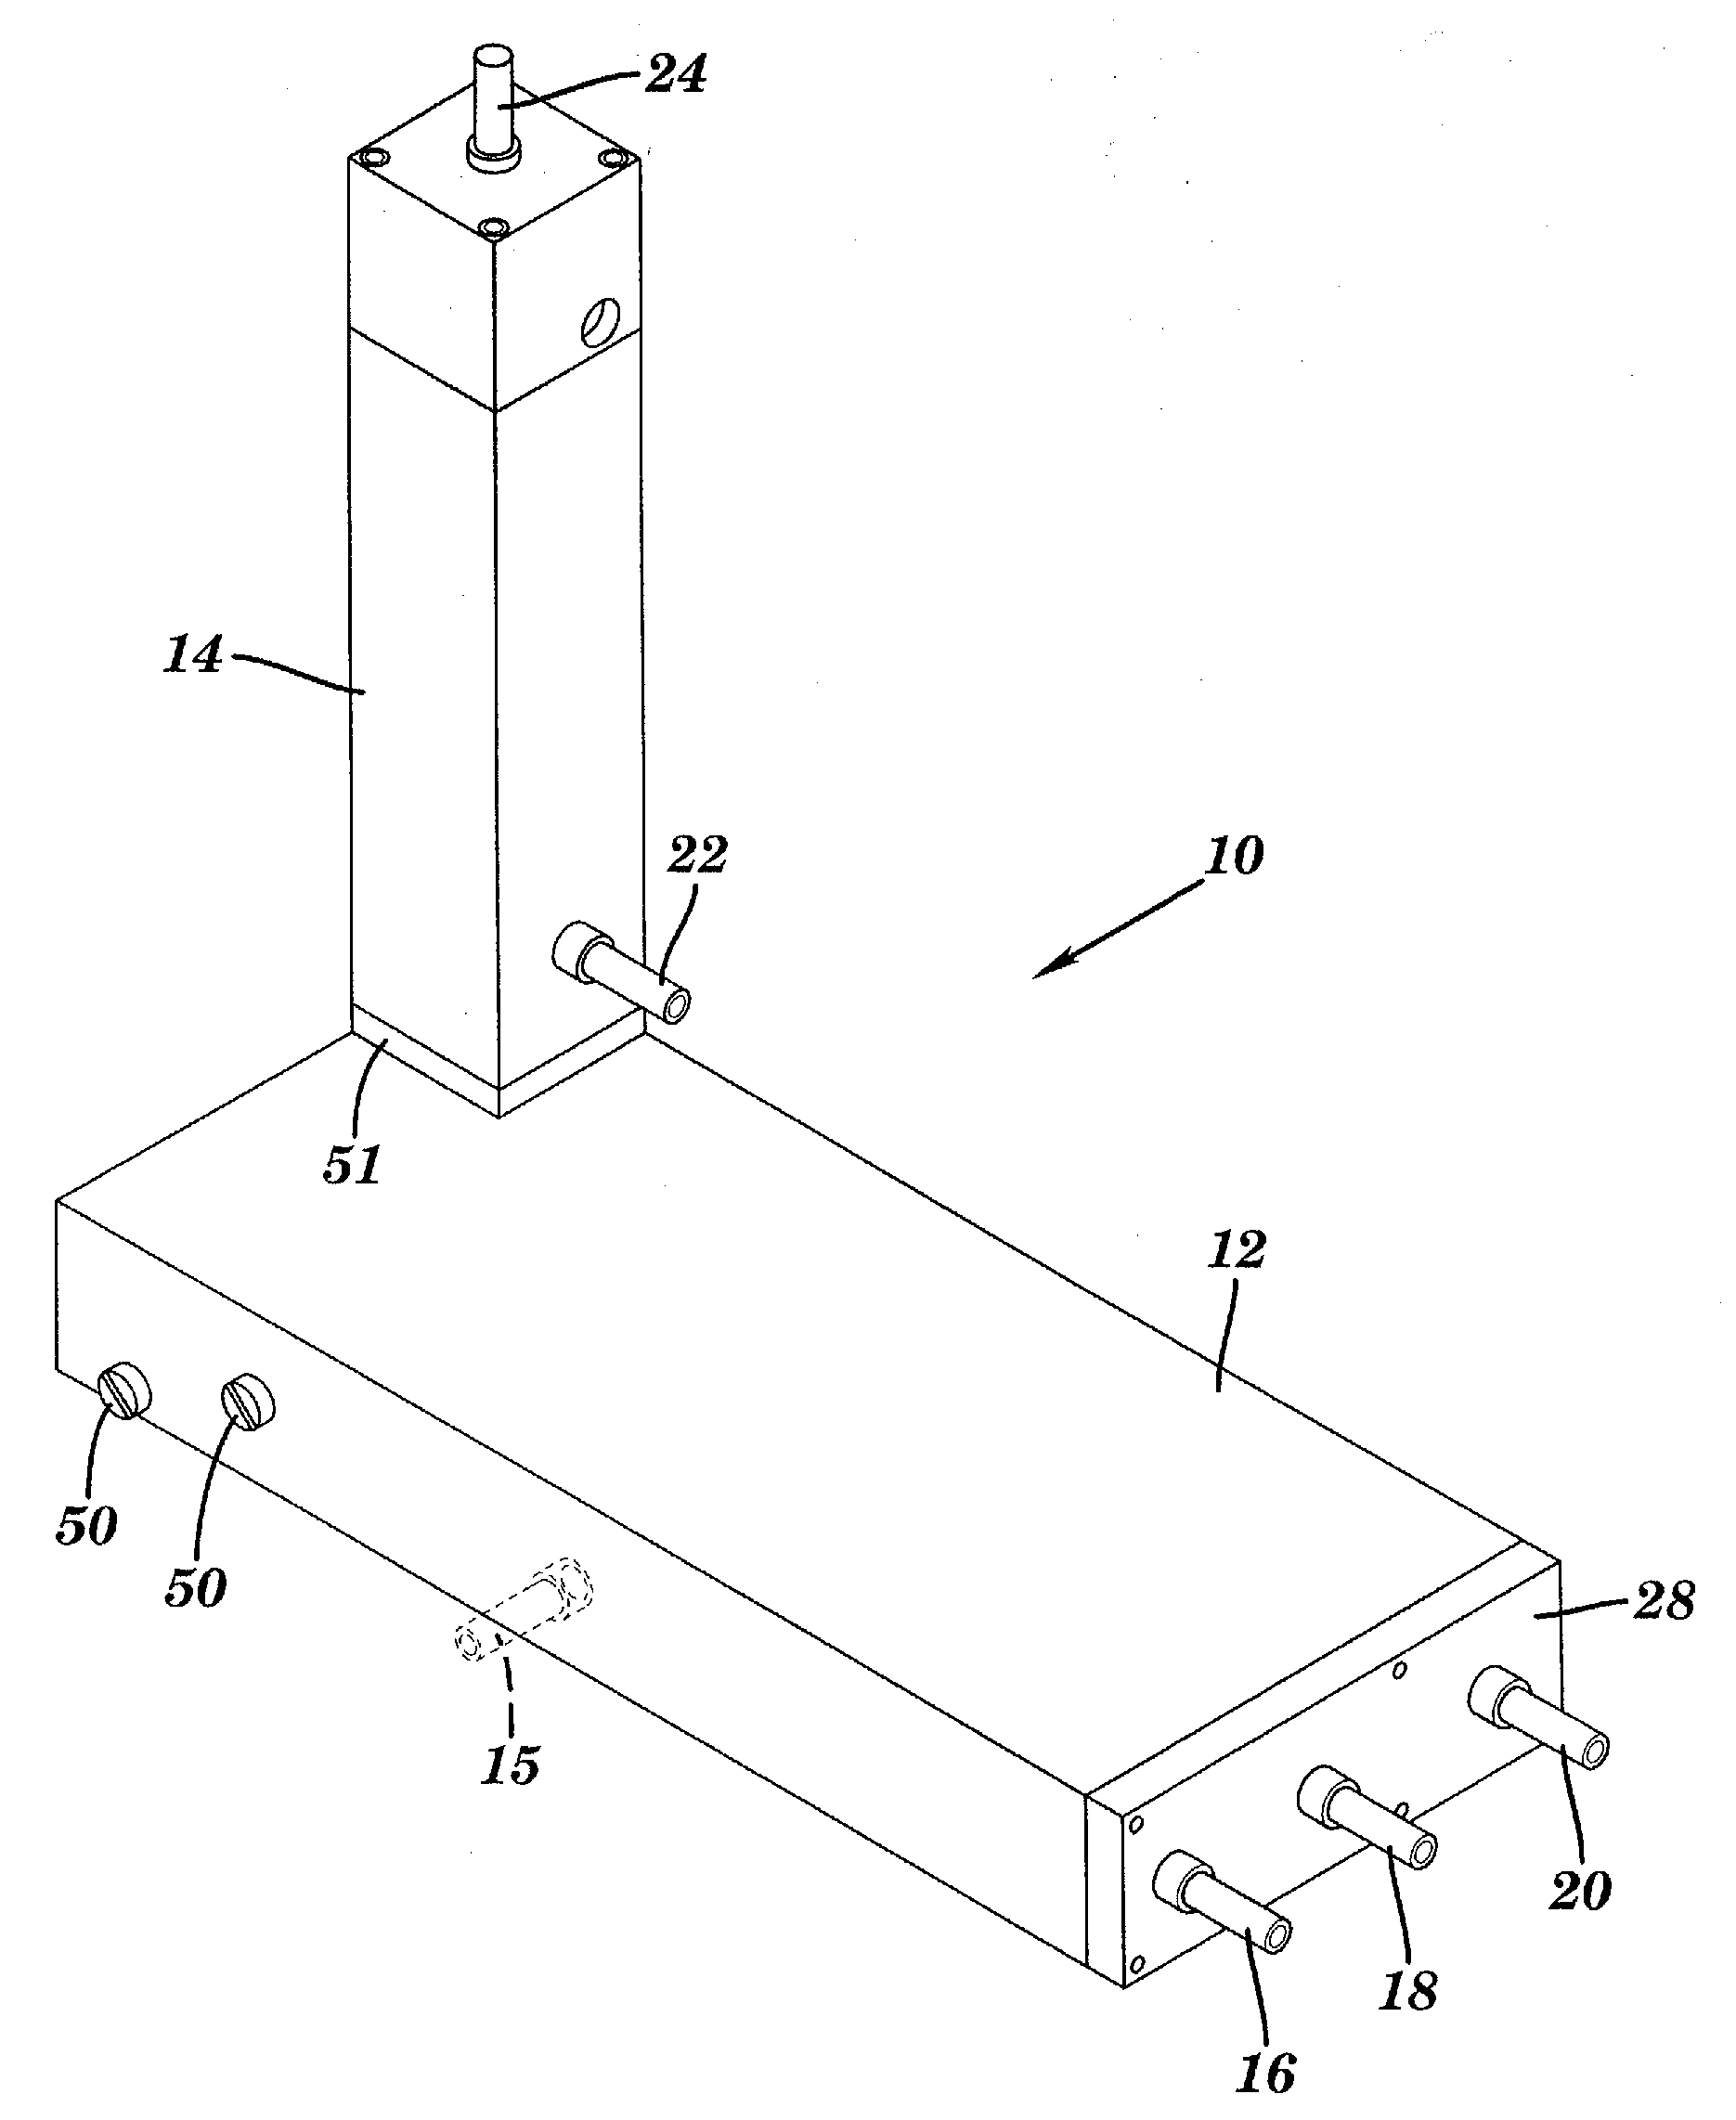 Devices, methods, and systems for detecting particles in aerosol gas streams